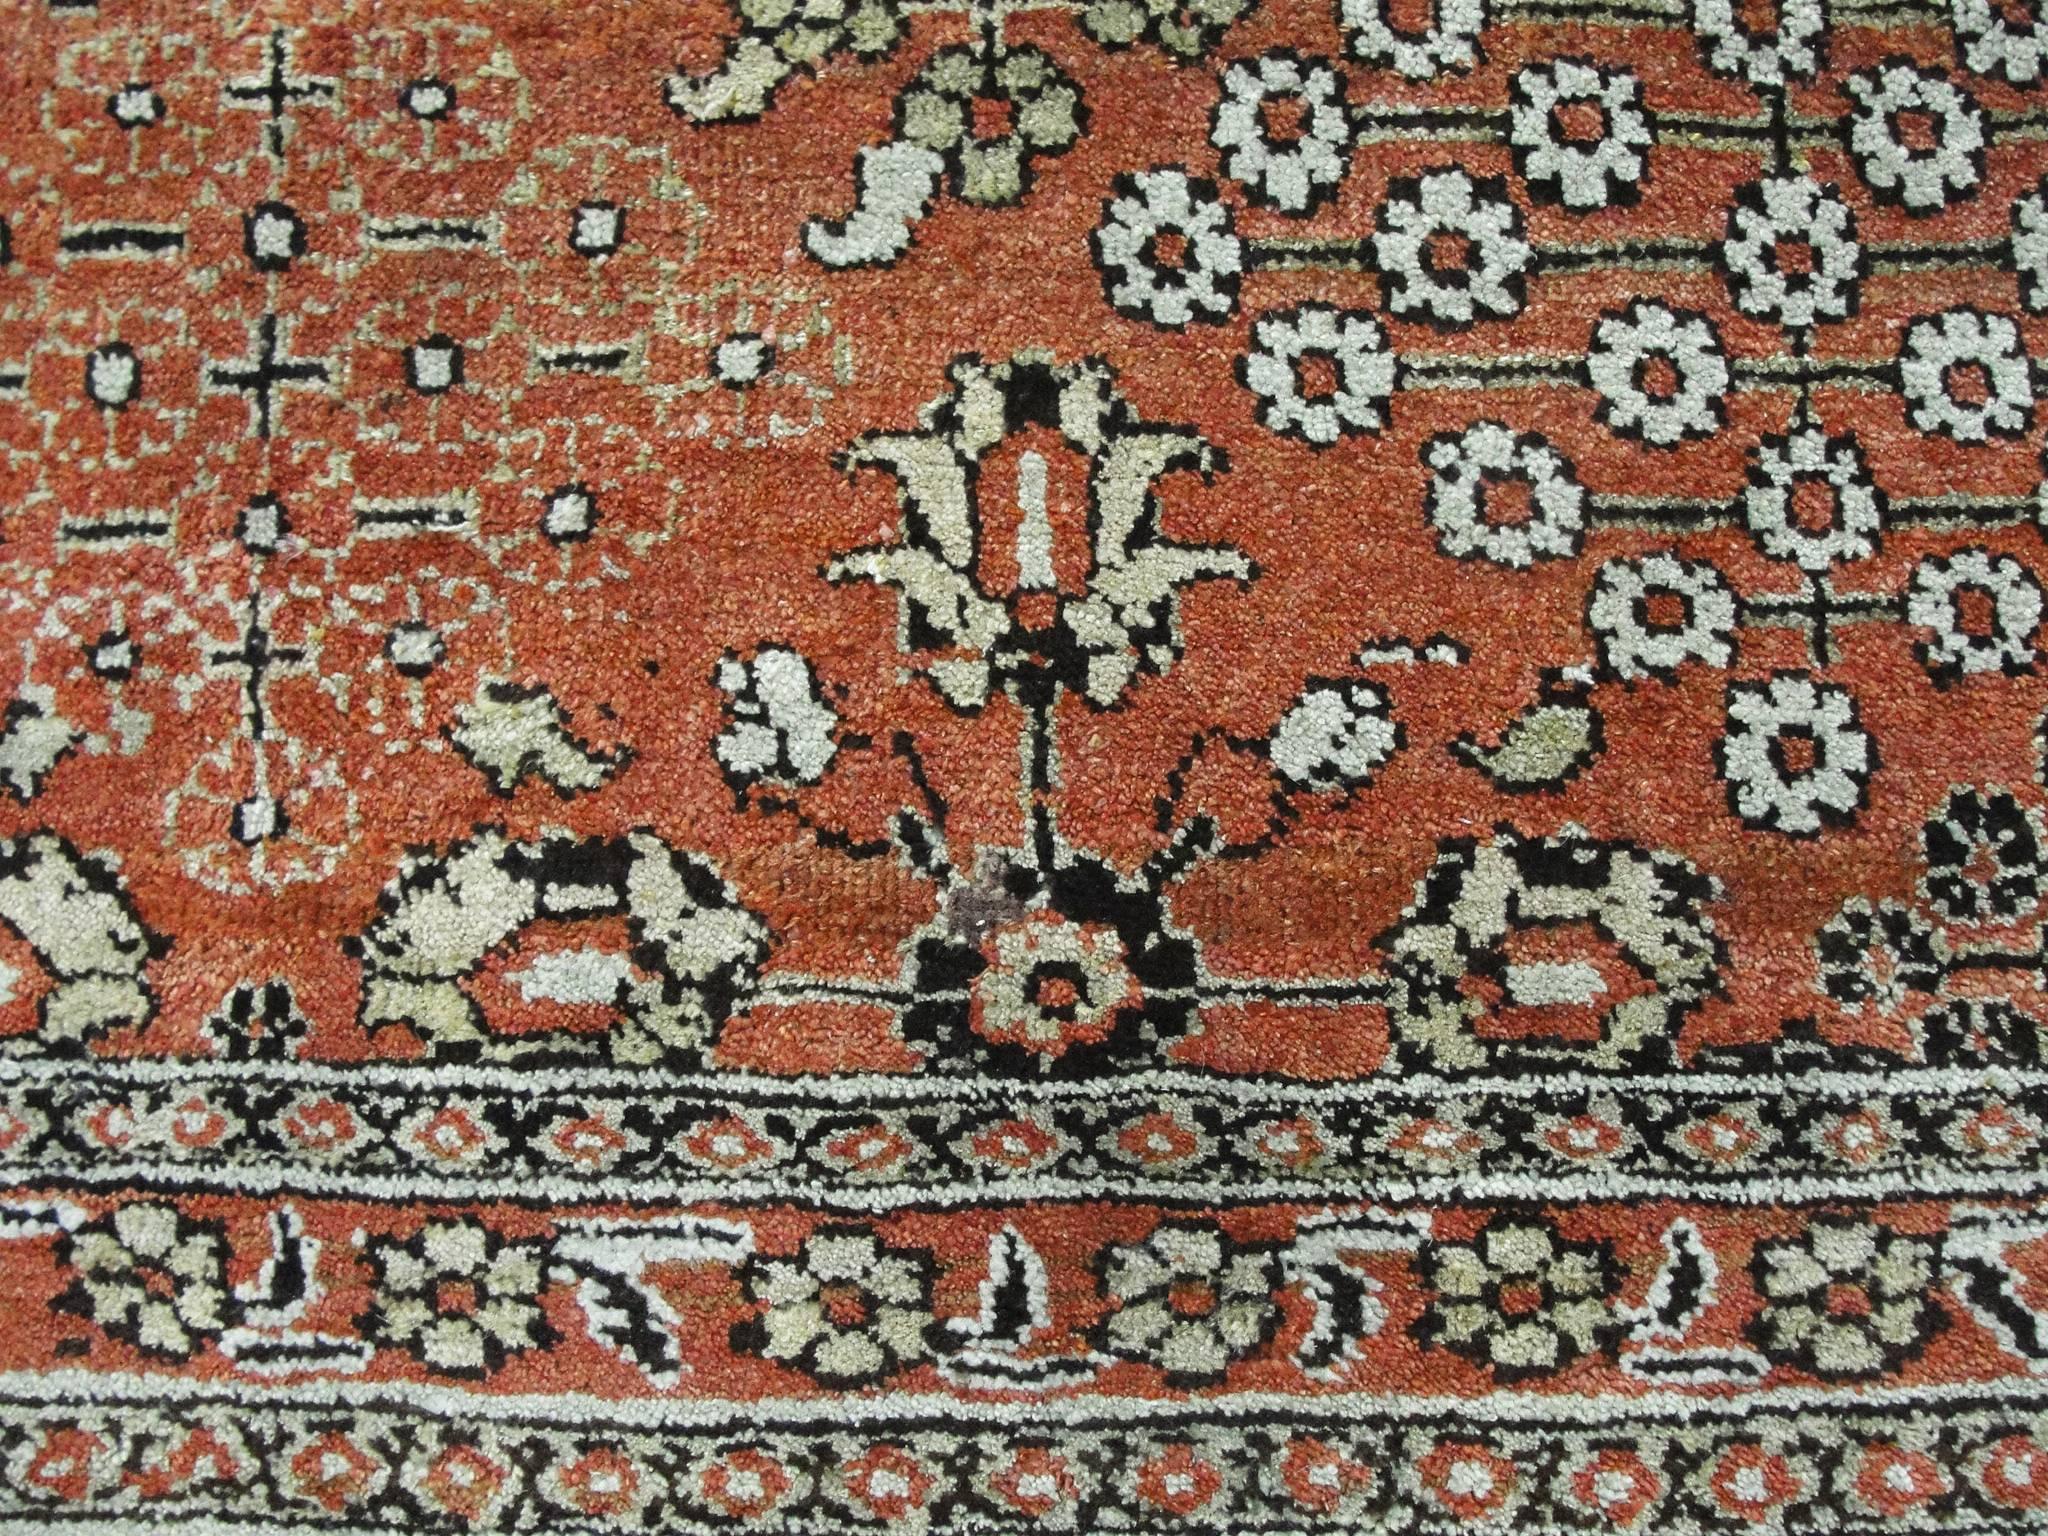 Hand-Woven Antique Persian Sultanabad Carpet, 8' x 9'6